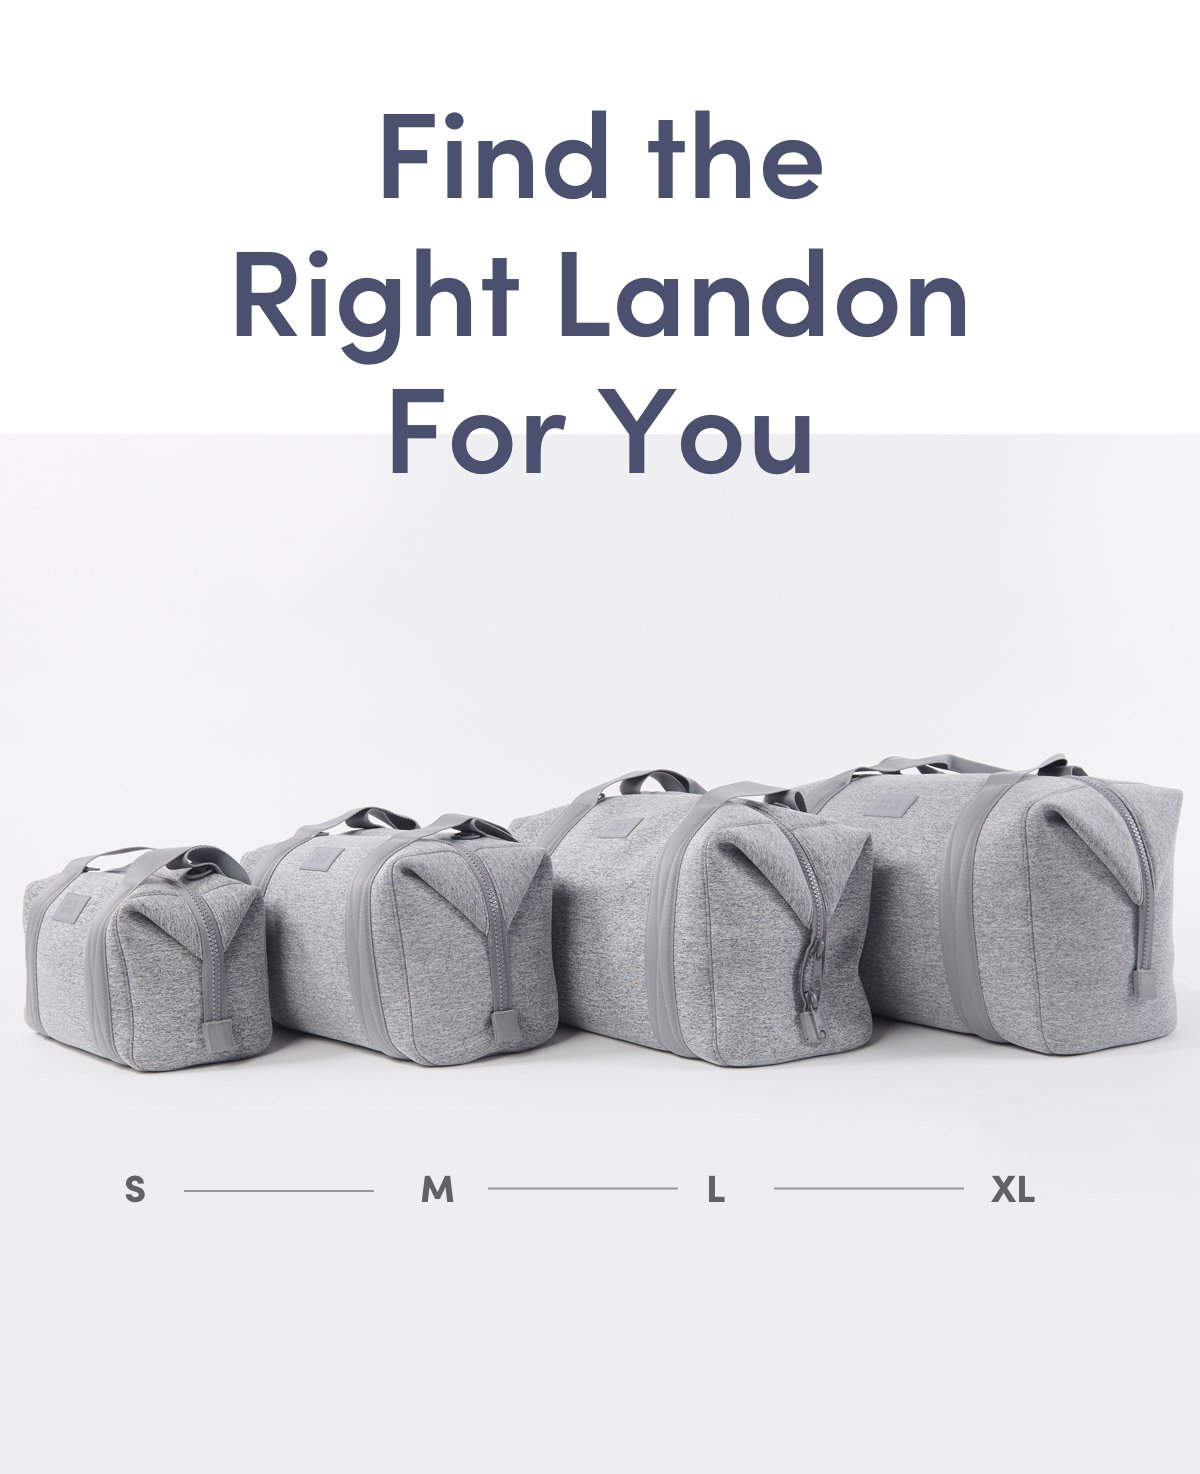 Find the Right Landon for You